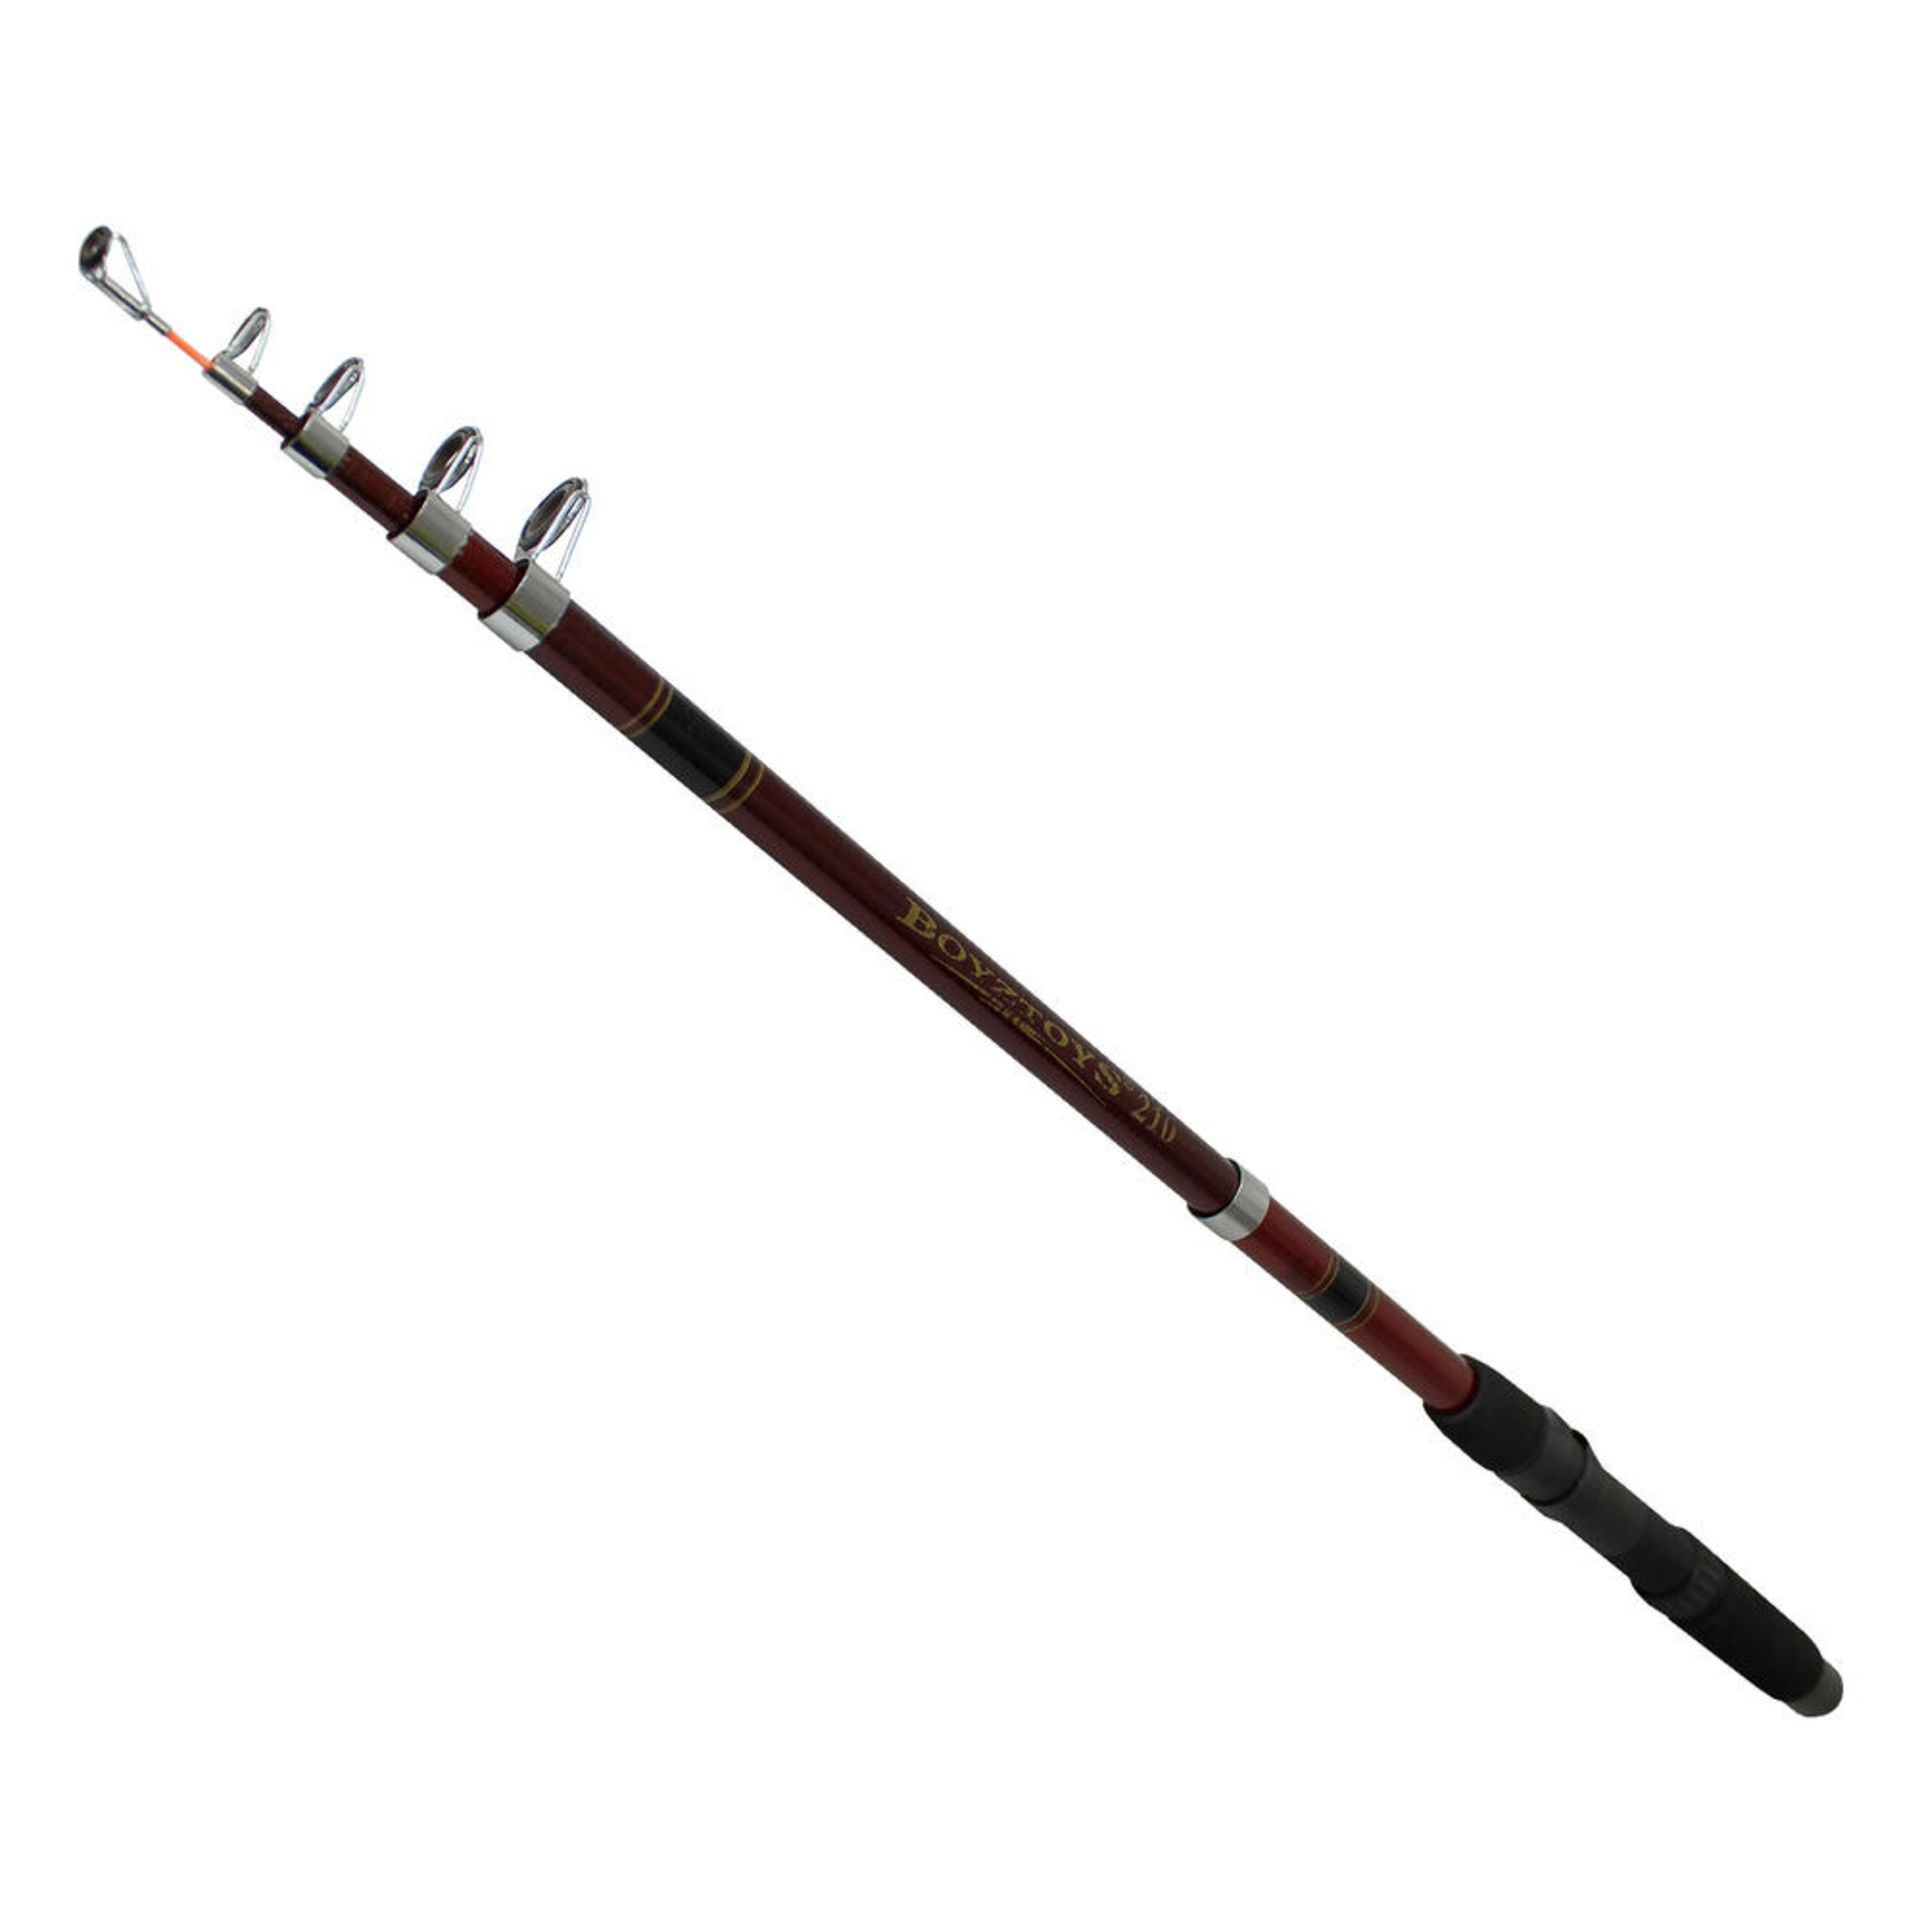 + VAT Brand New 2m Telescopic Fishing Rod - Soft Grip Handle - Ideal For Most Kinds of Fishing